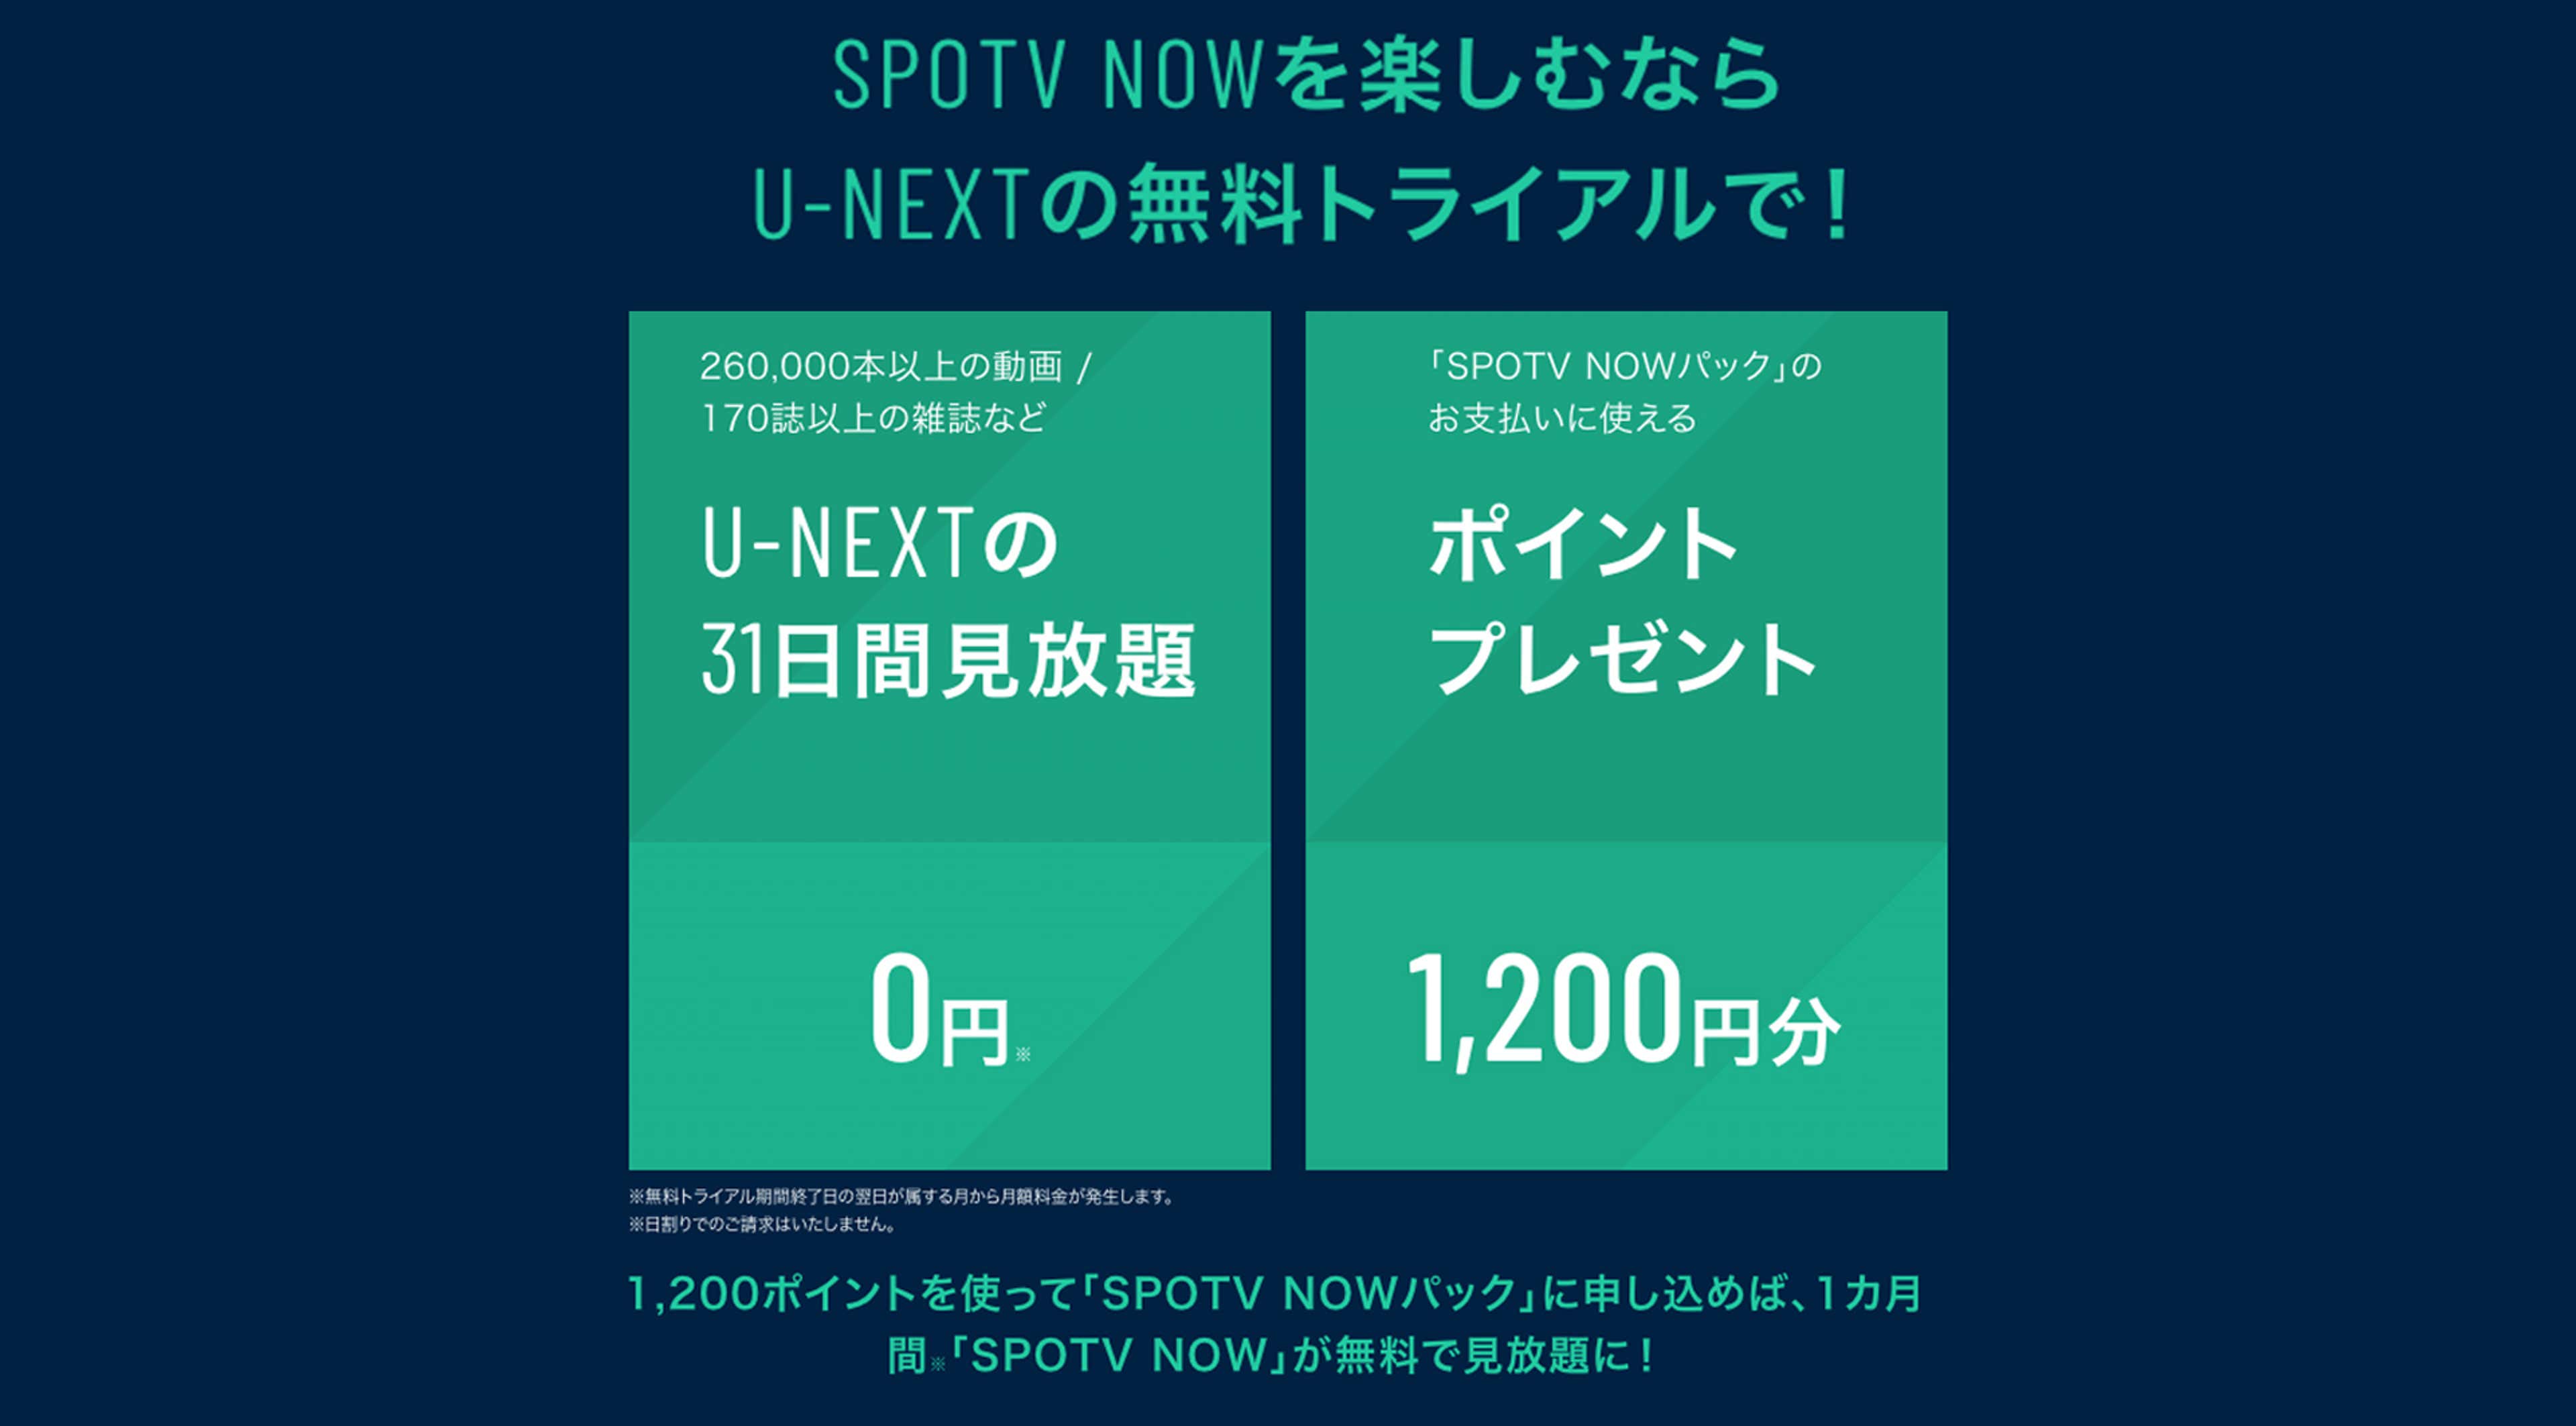 u-next spotv now pack join free trial